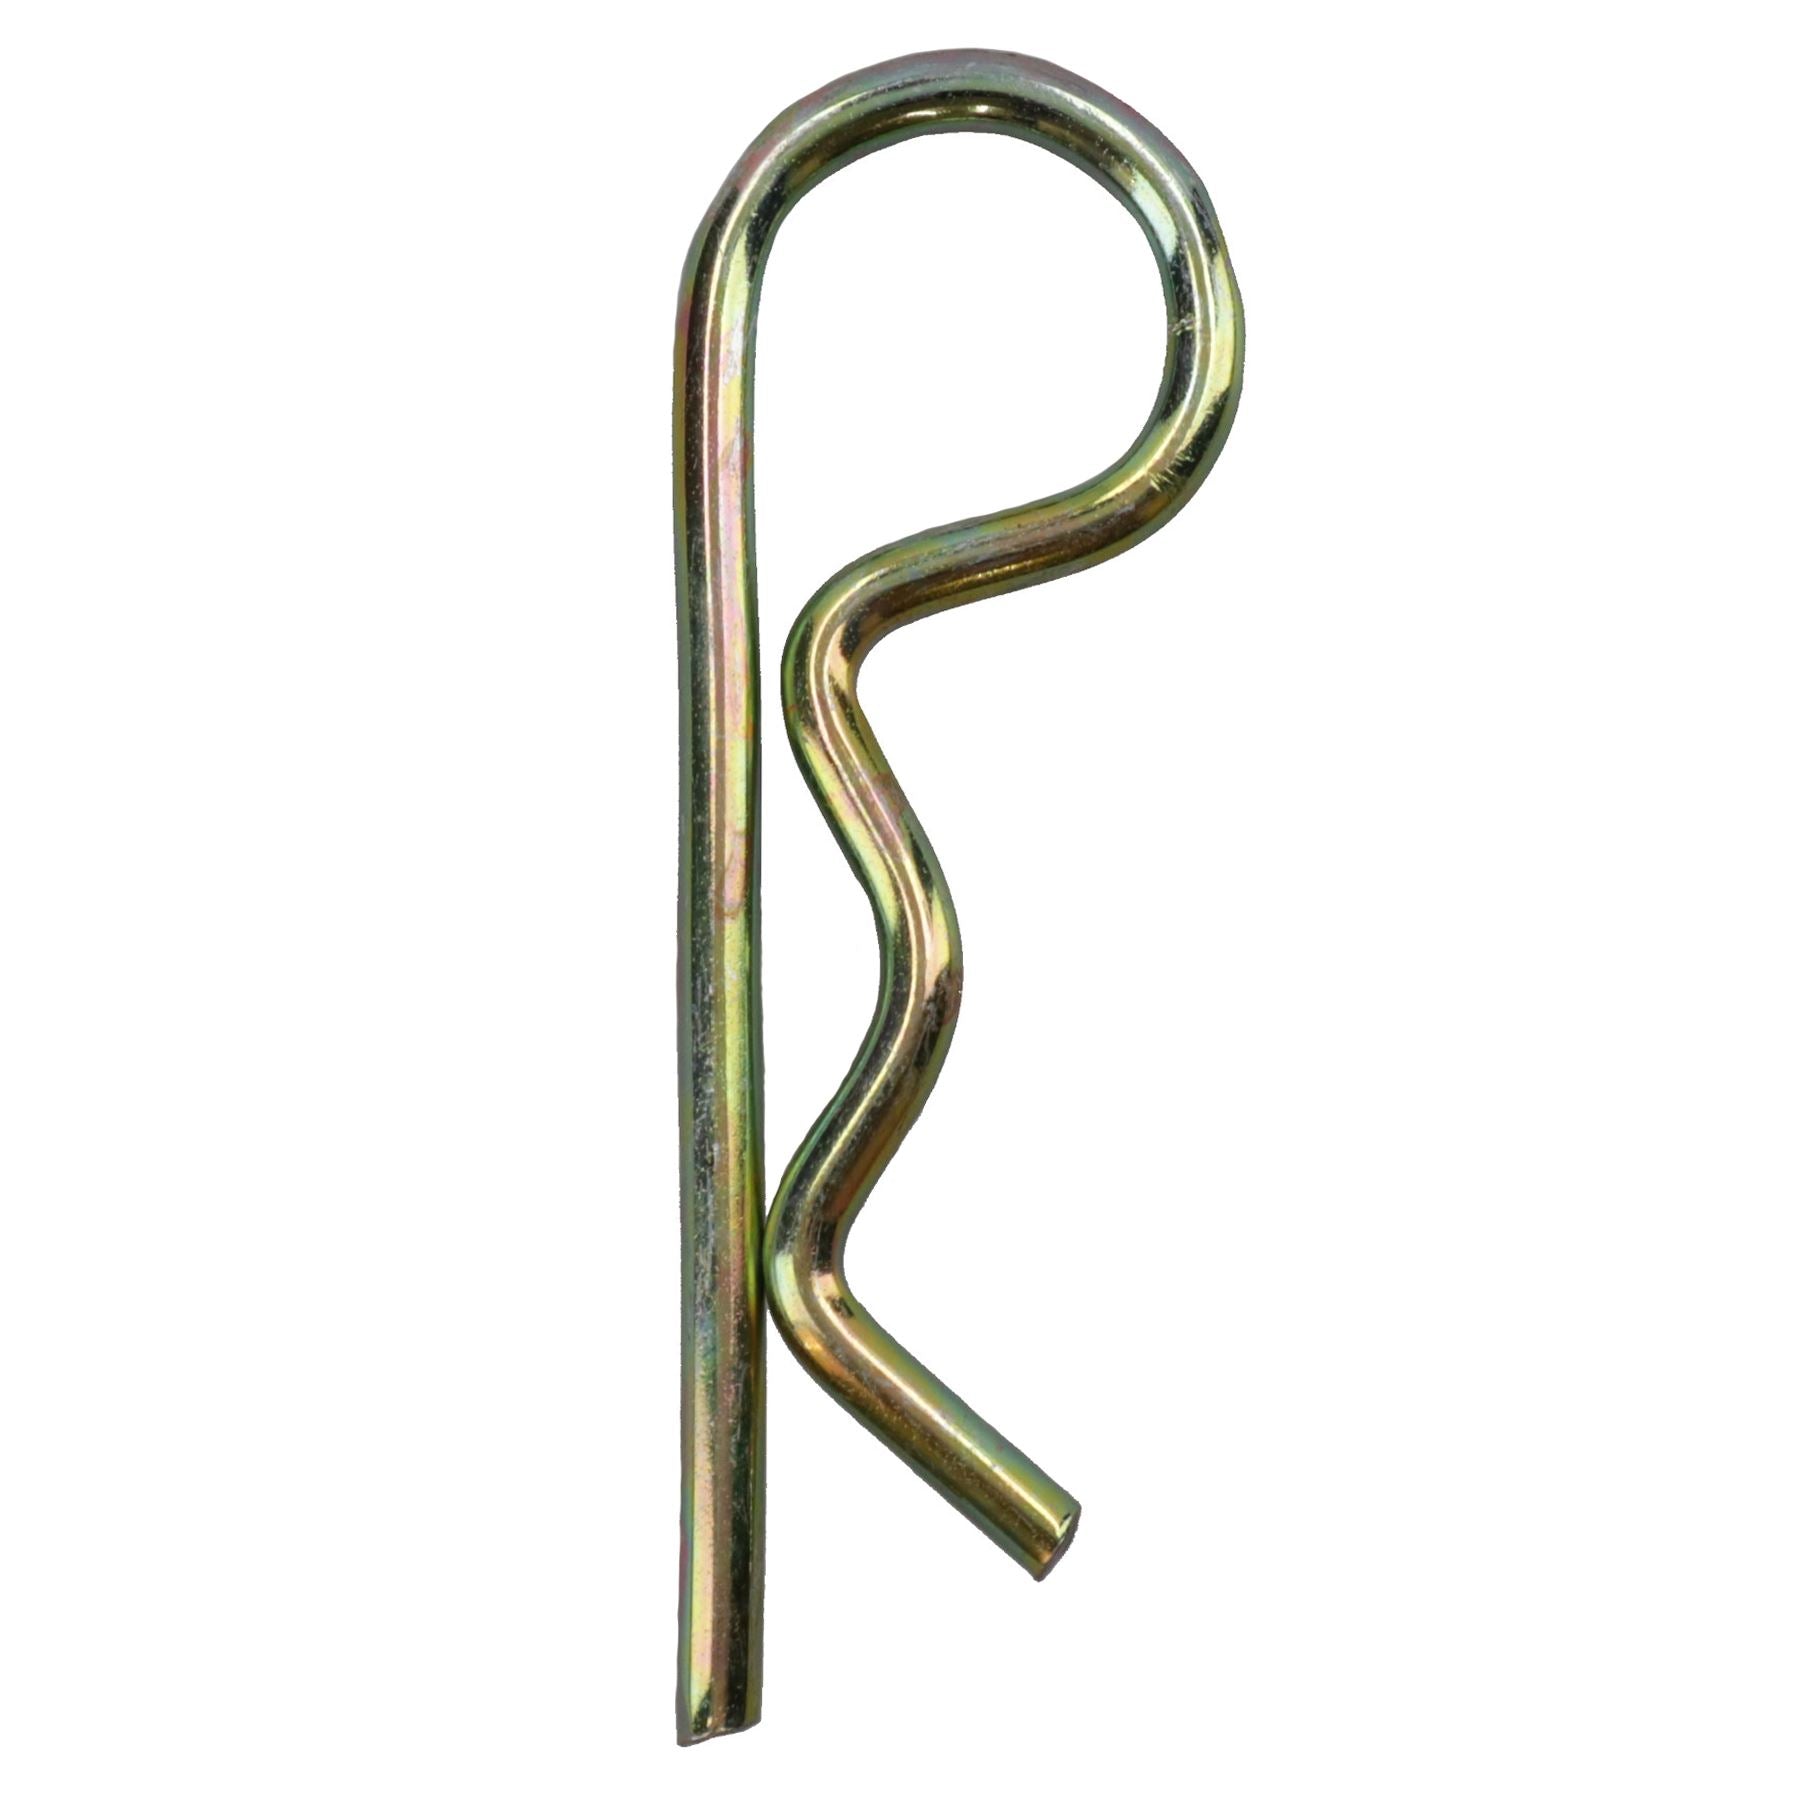 8mm R Clips Hair Pin Spring Cotter Pin Hitch Lynch Cotter Zinc Plated Steel